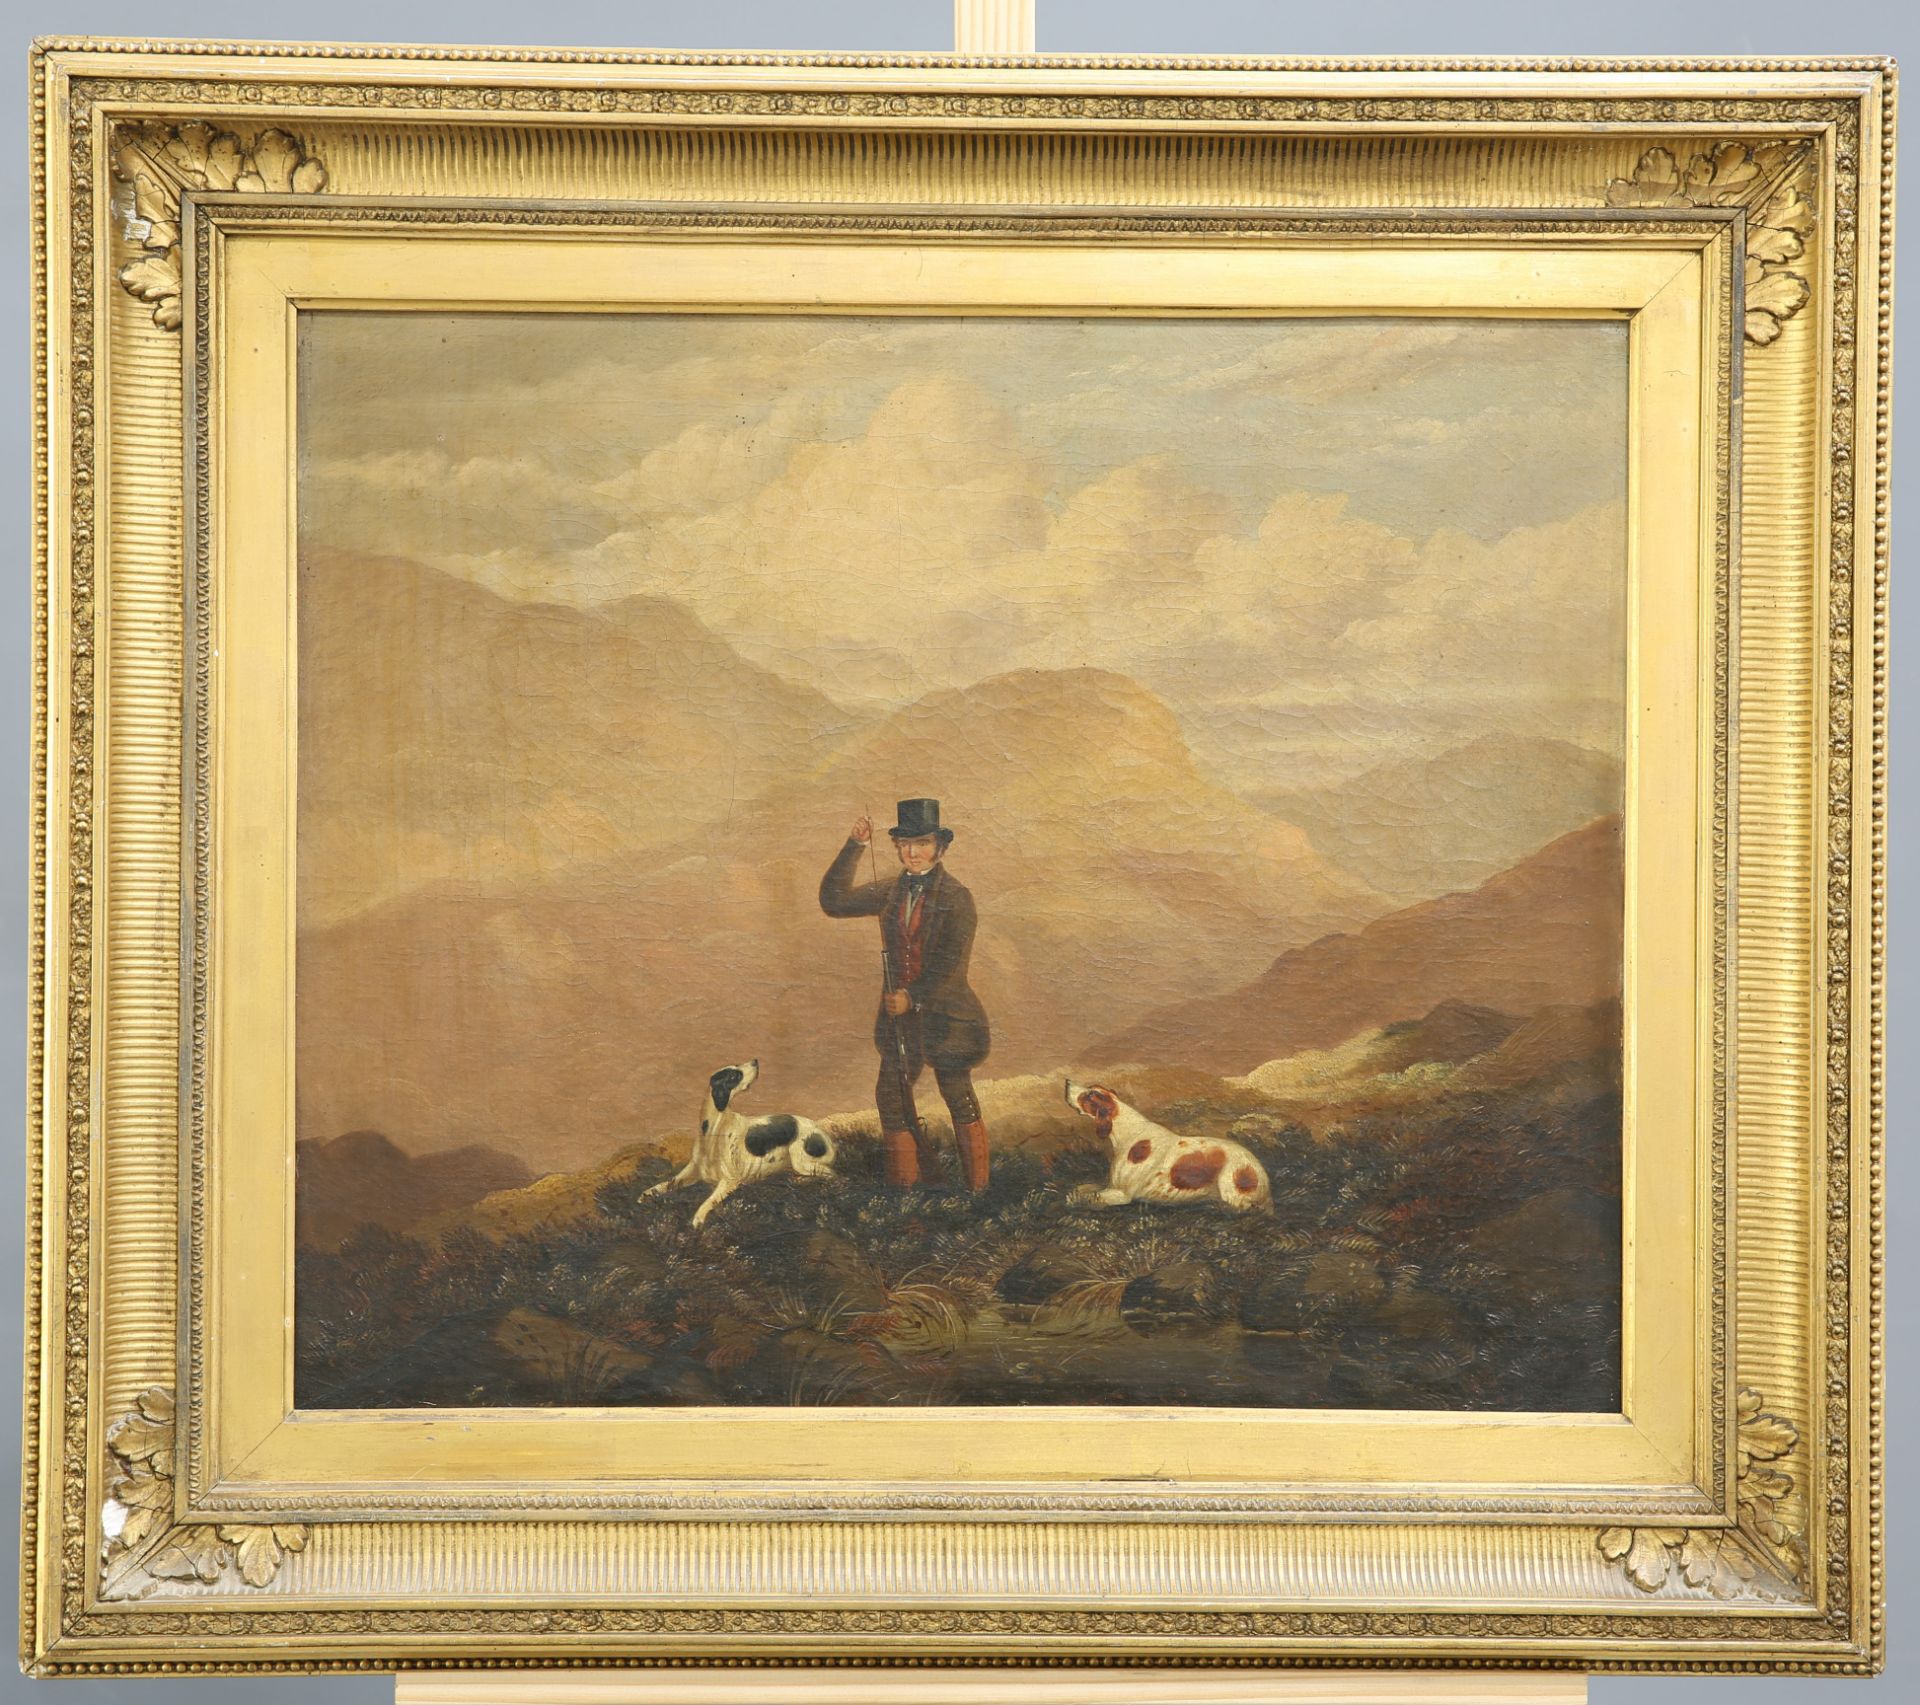 ENGLISH SCHOOL (18TH CENTURY), A SPORTSMAN AND HIS DOGS IN A LAKELAND LANDSCAPE, A PAIR, oil on - Image 3 of 4